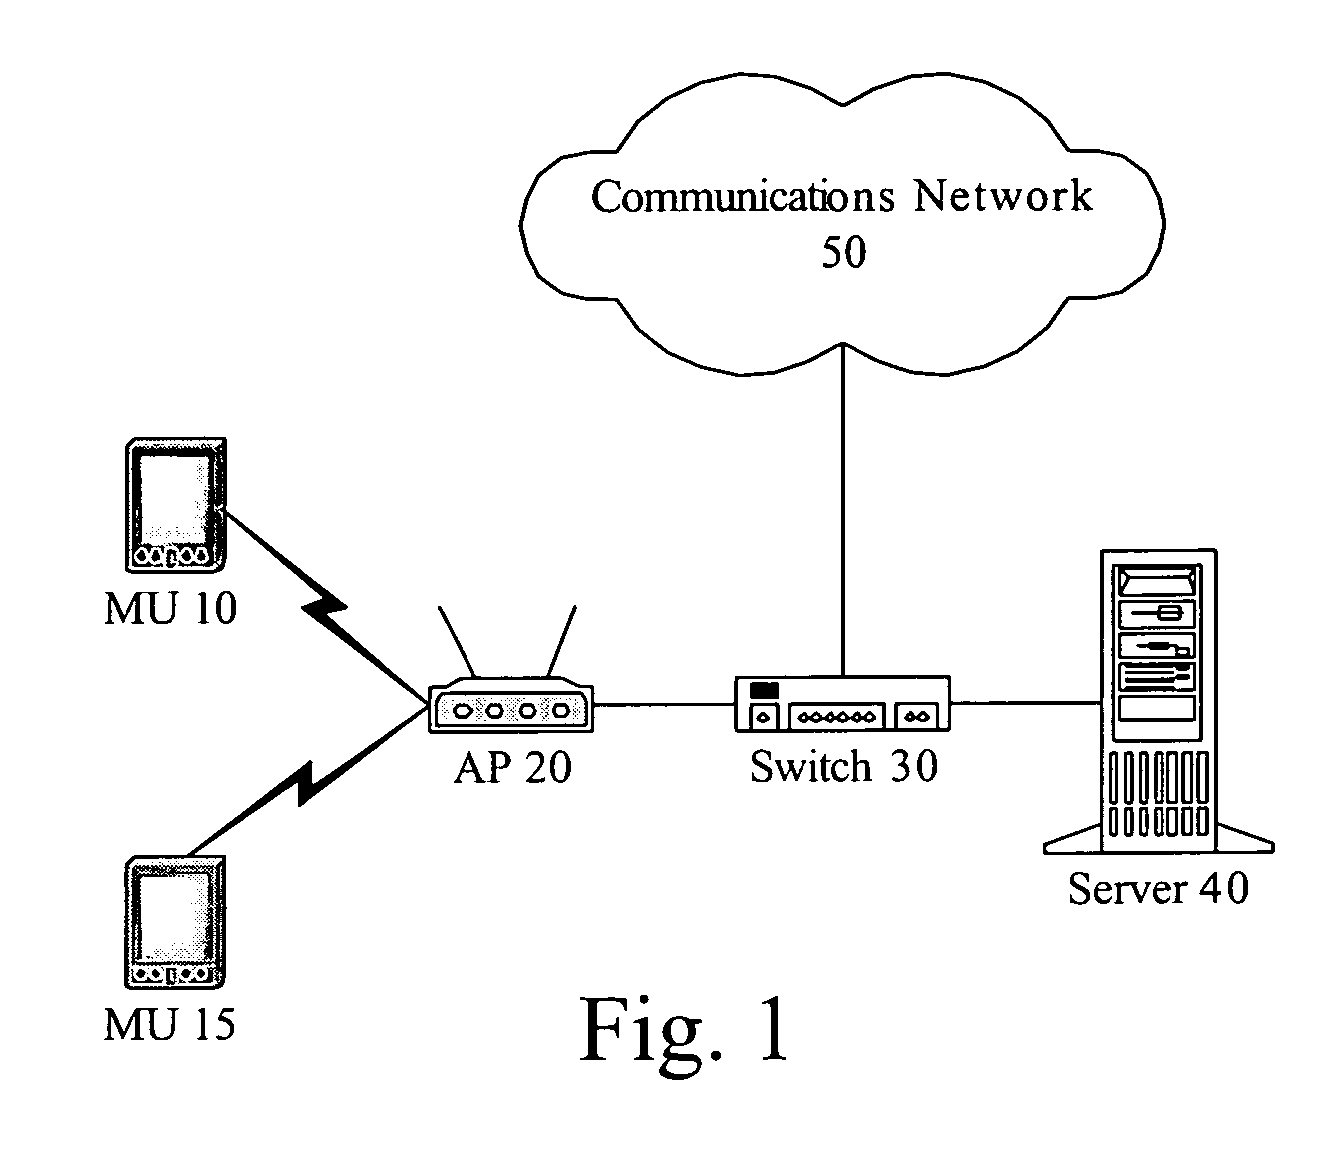 System and method for providing differentiated service levels to wireless devices in a wireless network